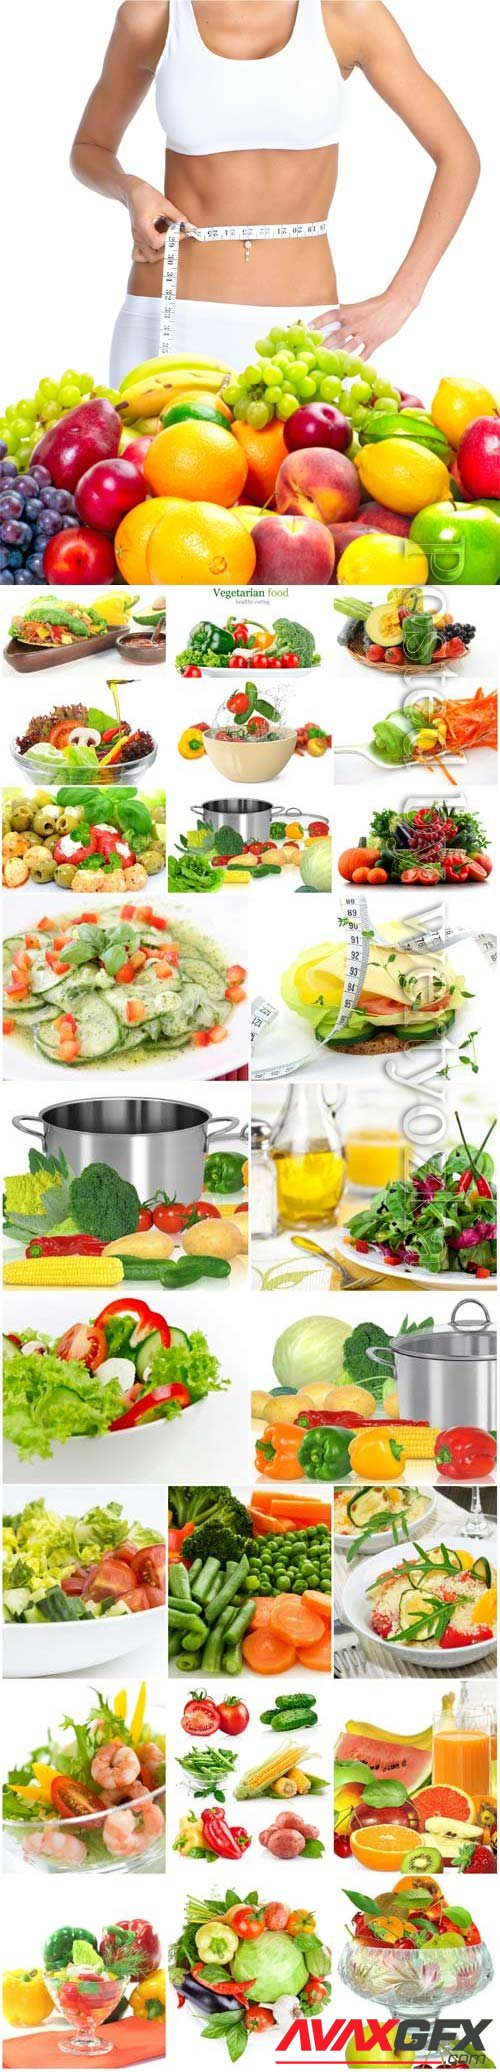 Healthy food, fresh vegetables and fruits stock photo